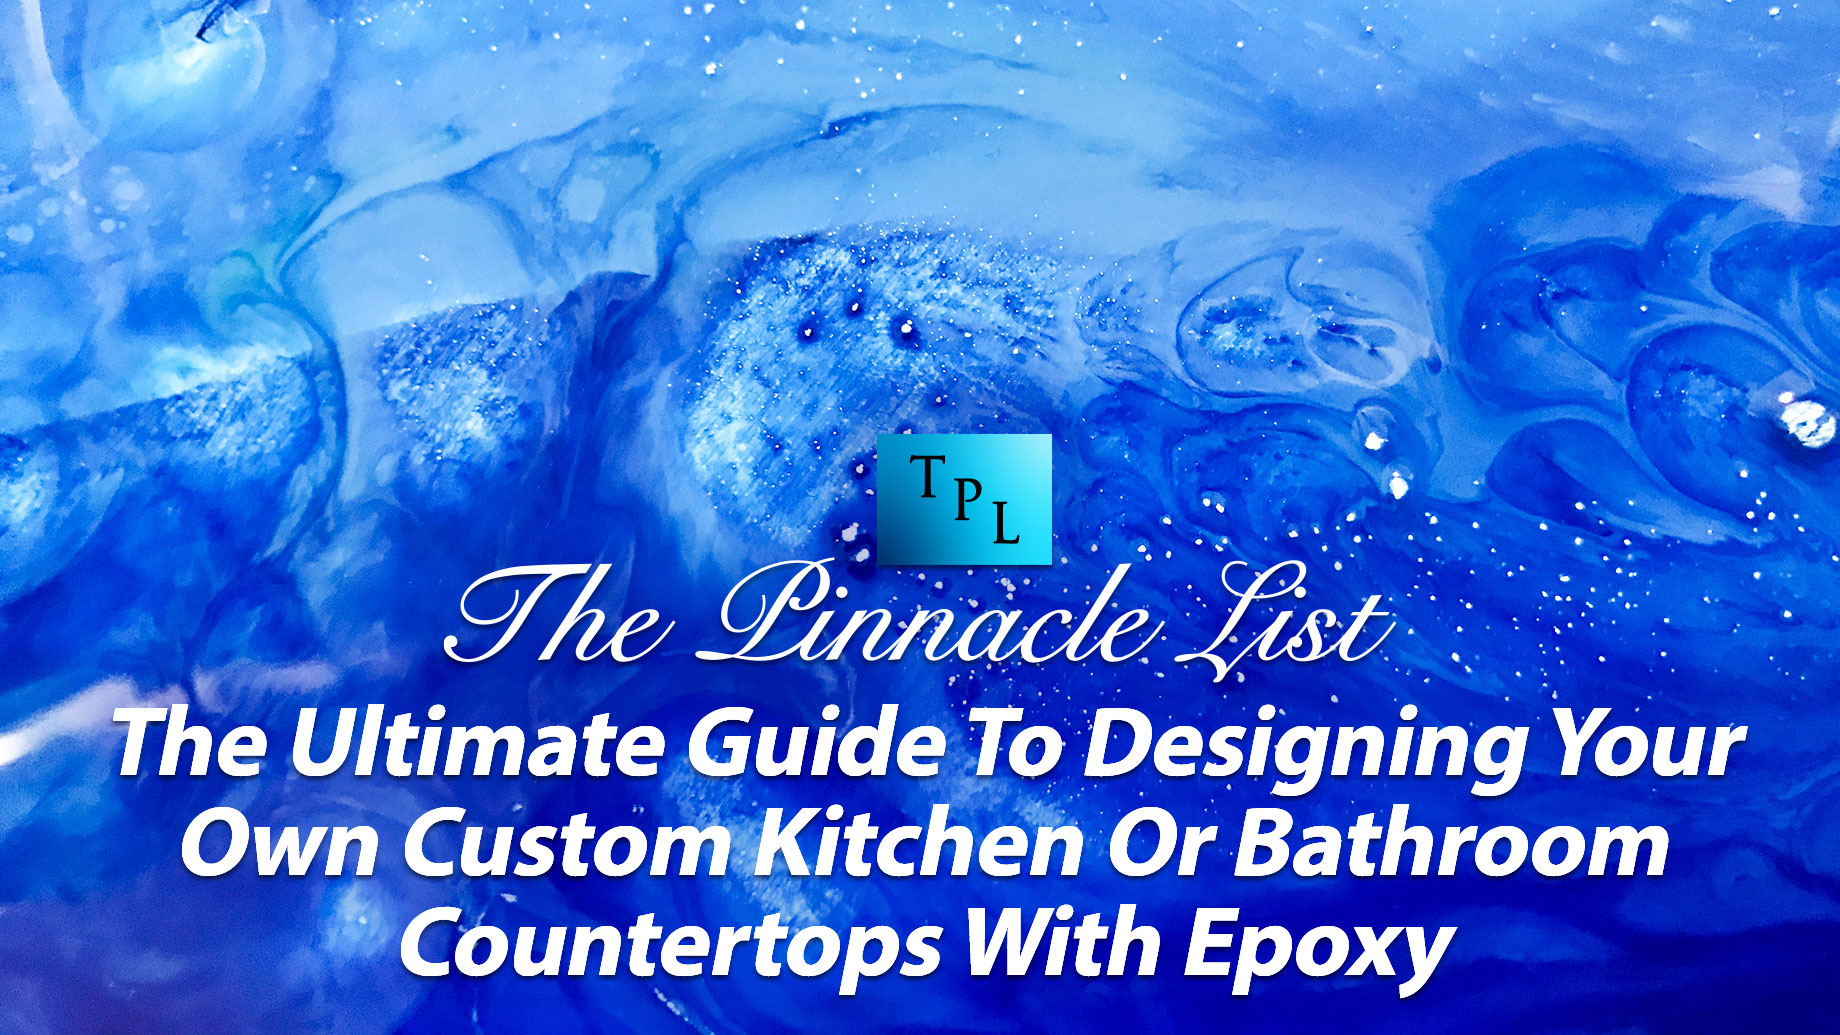 The Ultimate Guide To Designing Your Own Custom Kitchen Or Bathroom Countertops With Epoxy